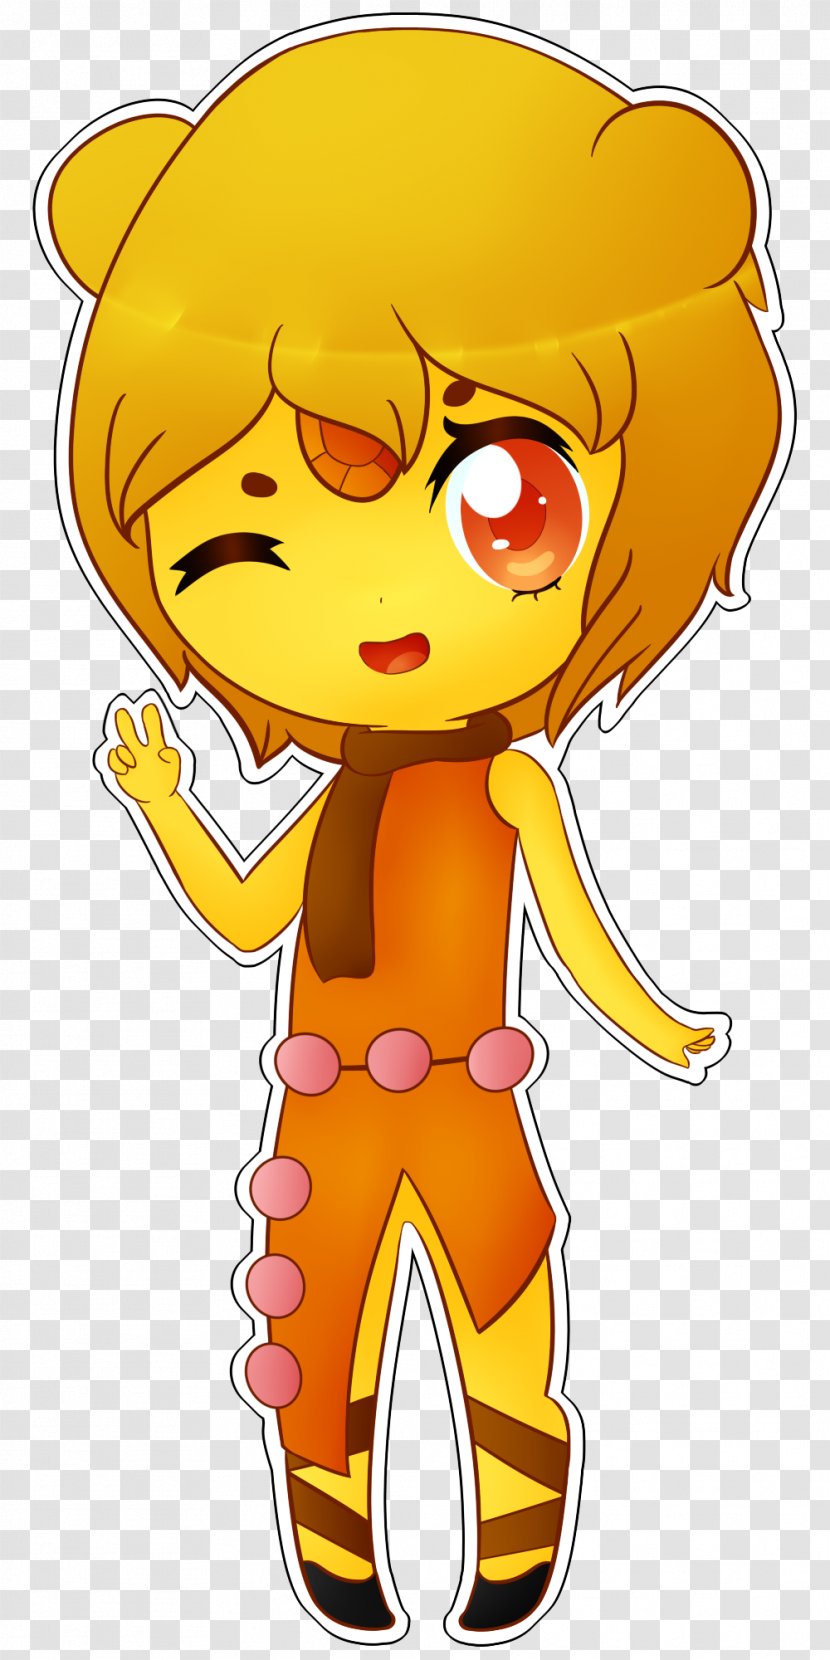 Character Line Clip Art - Yellow Transparent PNG